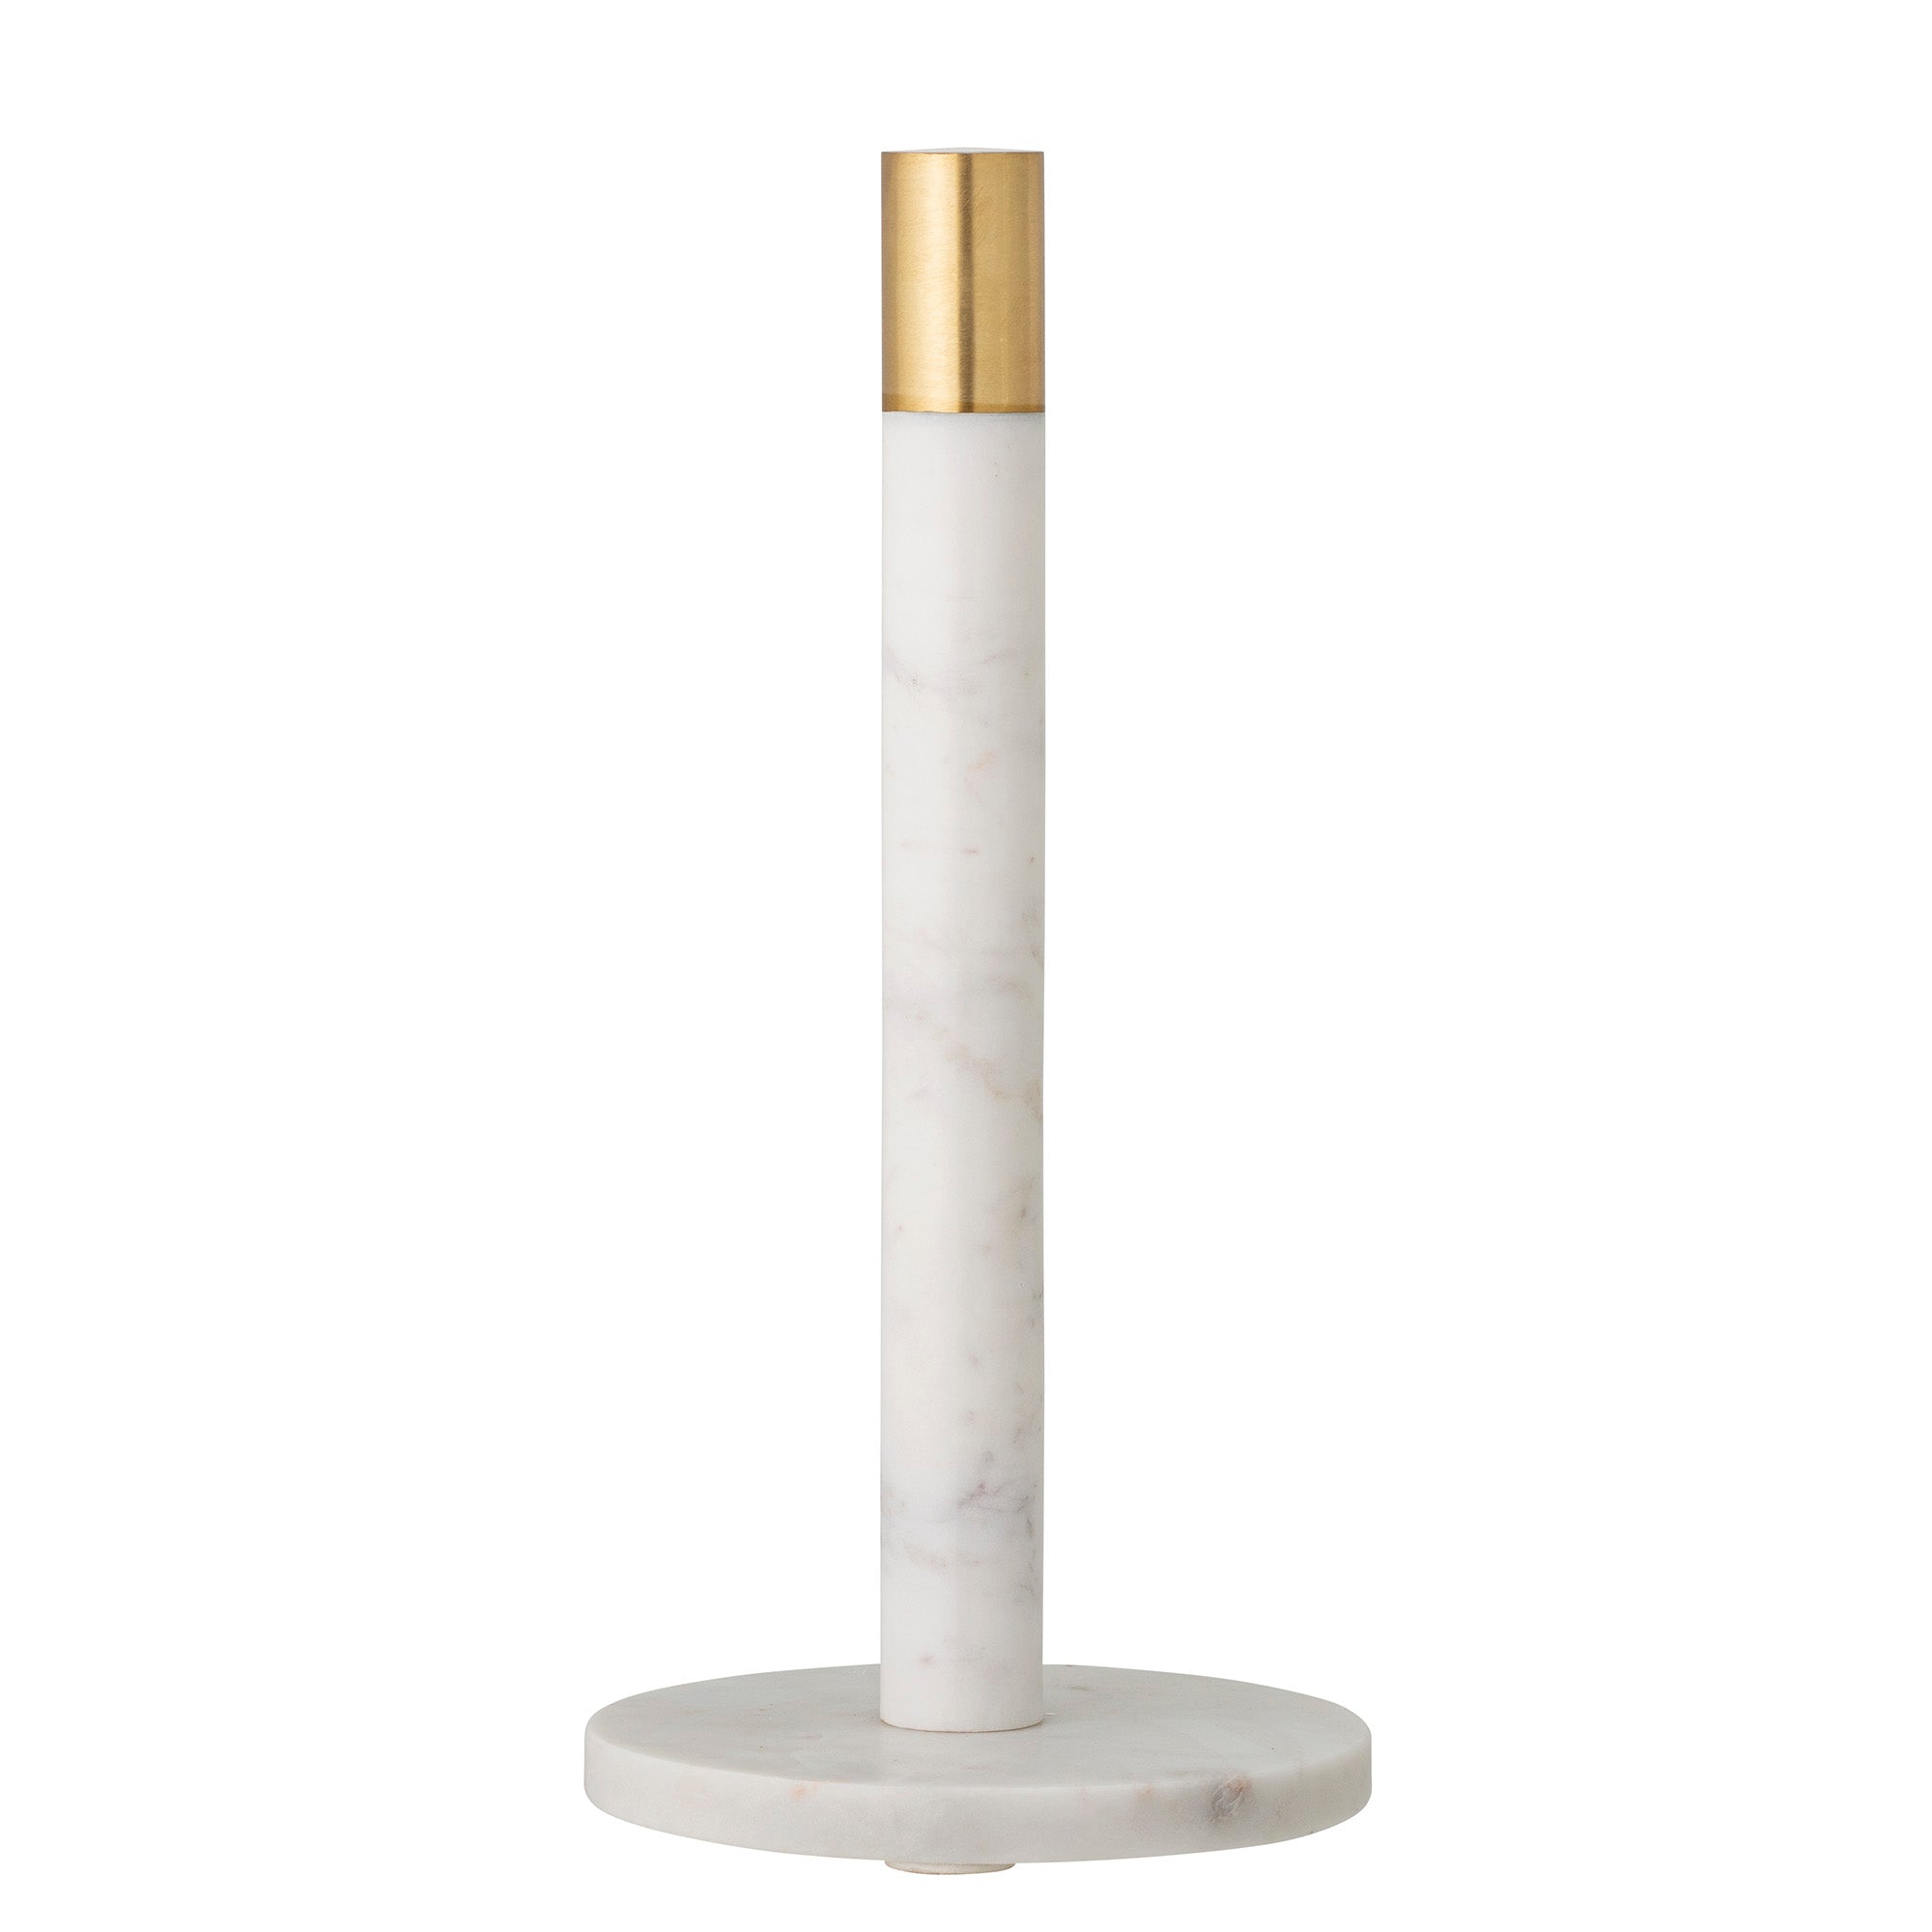 Marble Kitchen Roll Holder White and Gold Brass Paper Stand